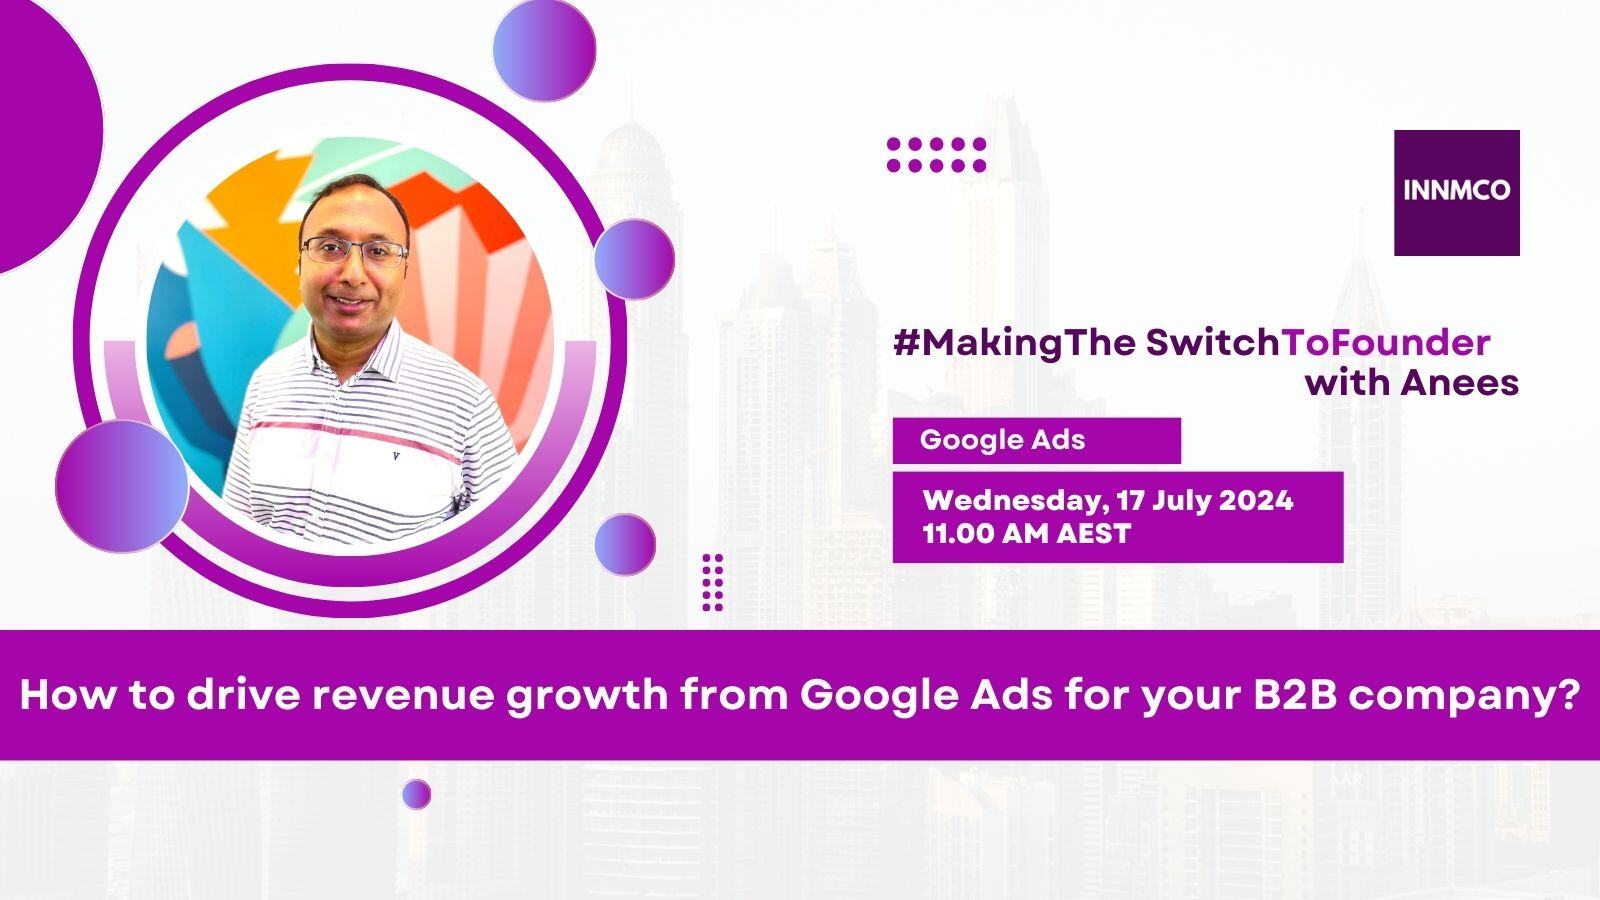 INNMCO Webinar - Email Marketing Banner - July 2024 - How to drive revenue growth from Google Ads for your B2B company